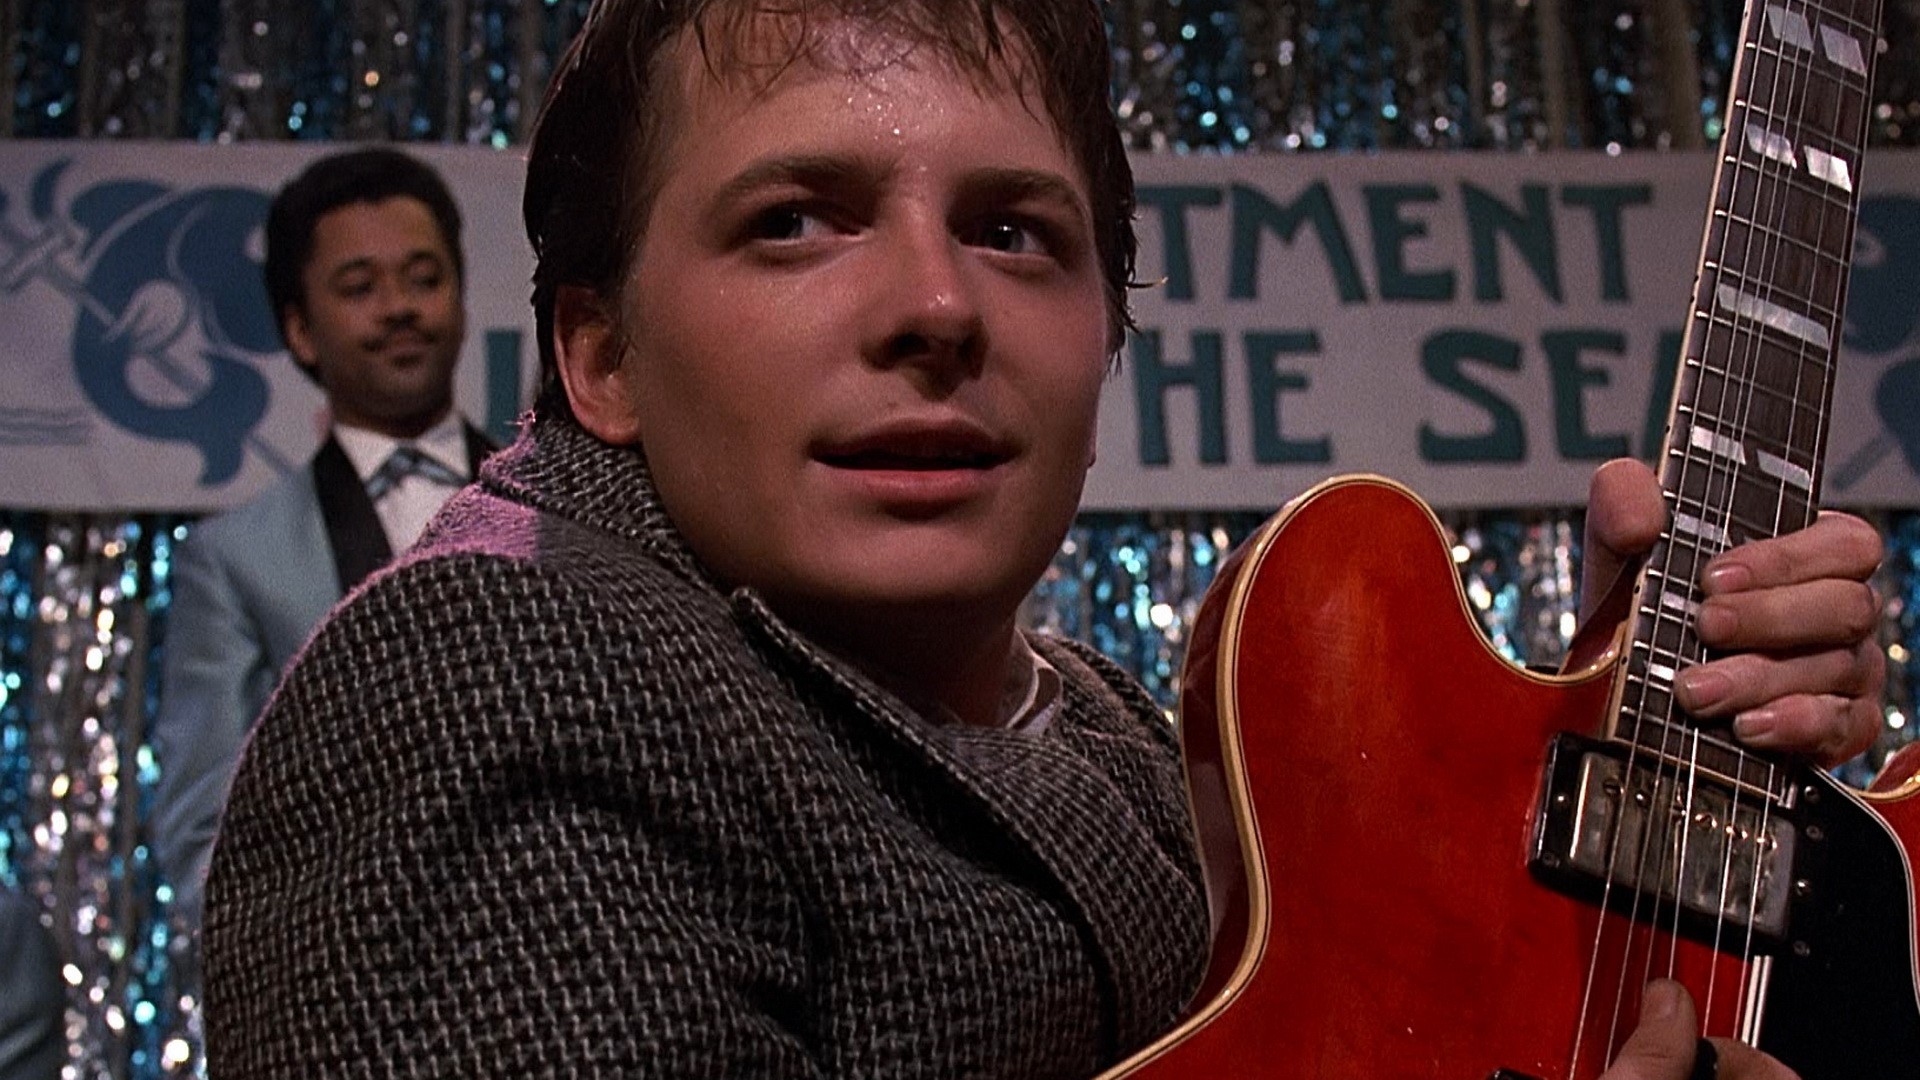 People 1920x1080 men actor movies film stills suits Back to the Future Michael J. Fox guitar music playing stages Marty McFly sweat musician electric guitar science fiction